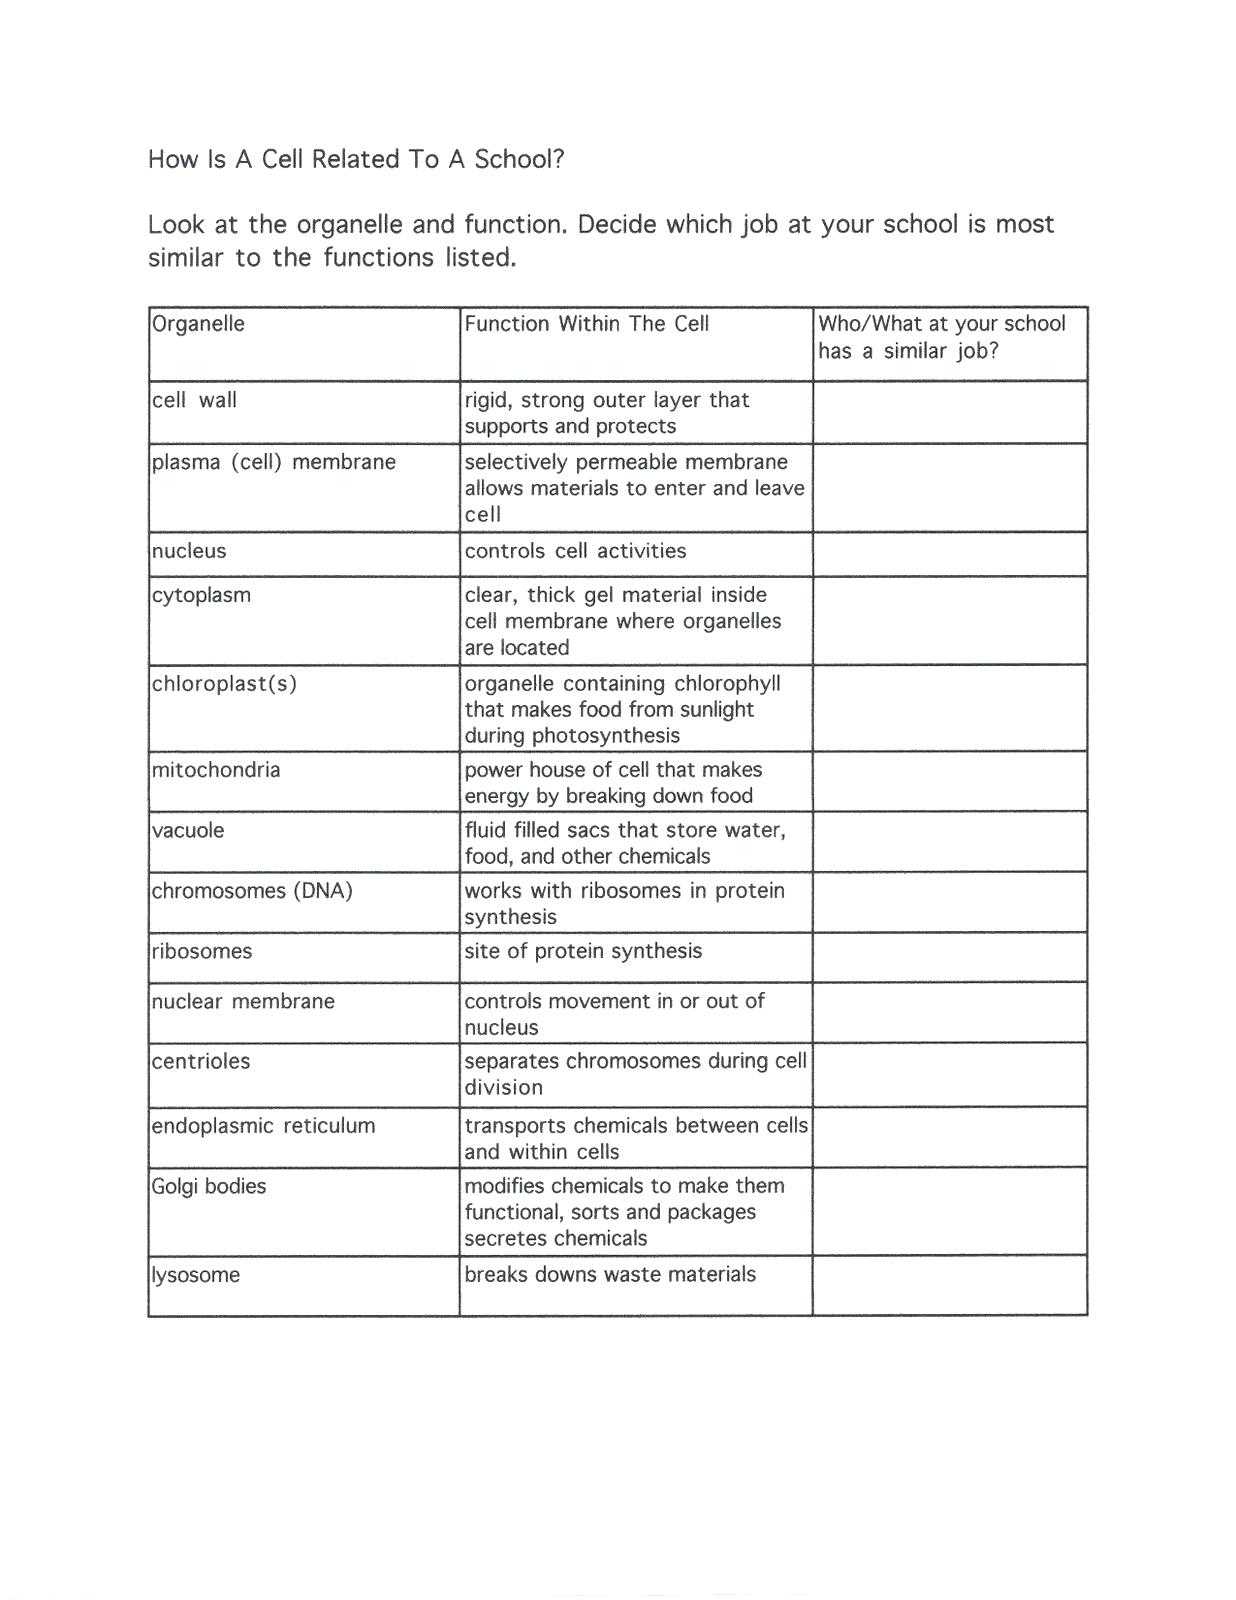 Protein Synthesis Worksheet Answer Key as Well as Free Worksheets Library Download and Print Worksheets